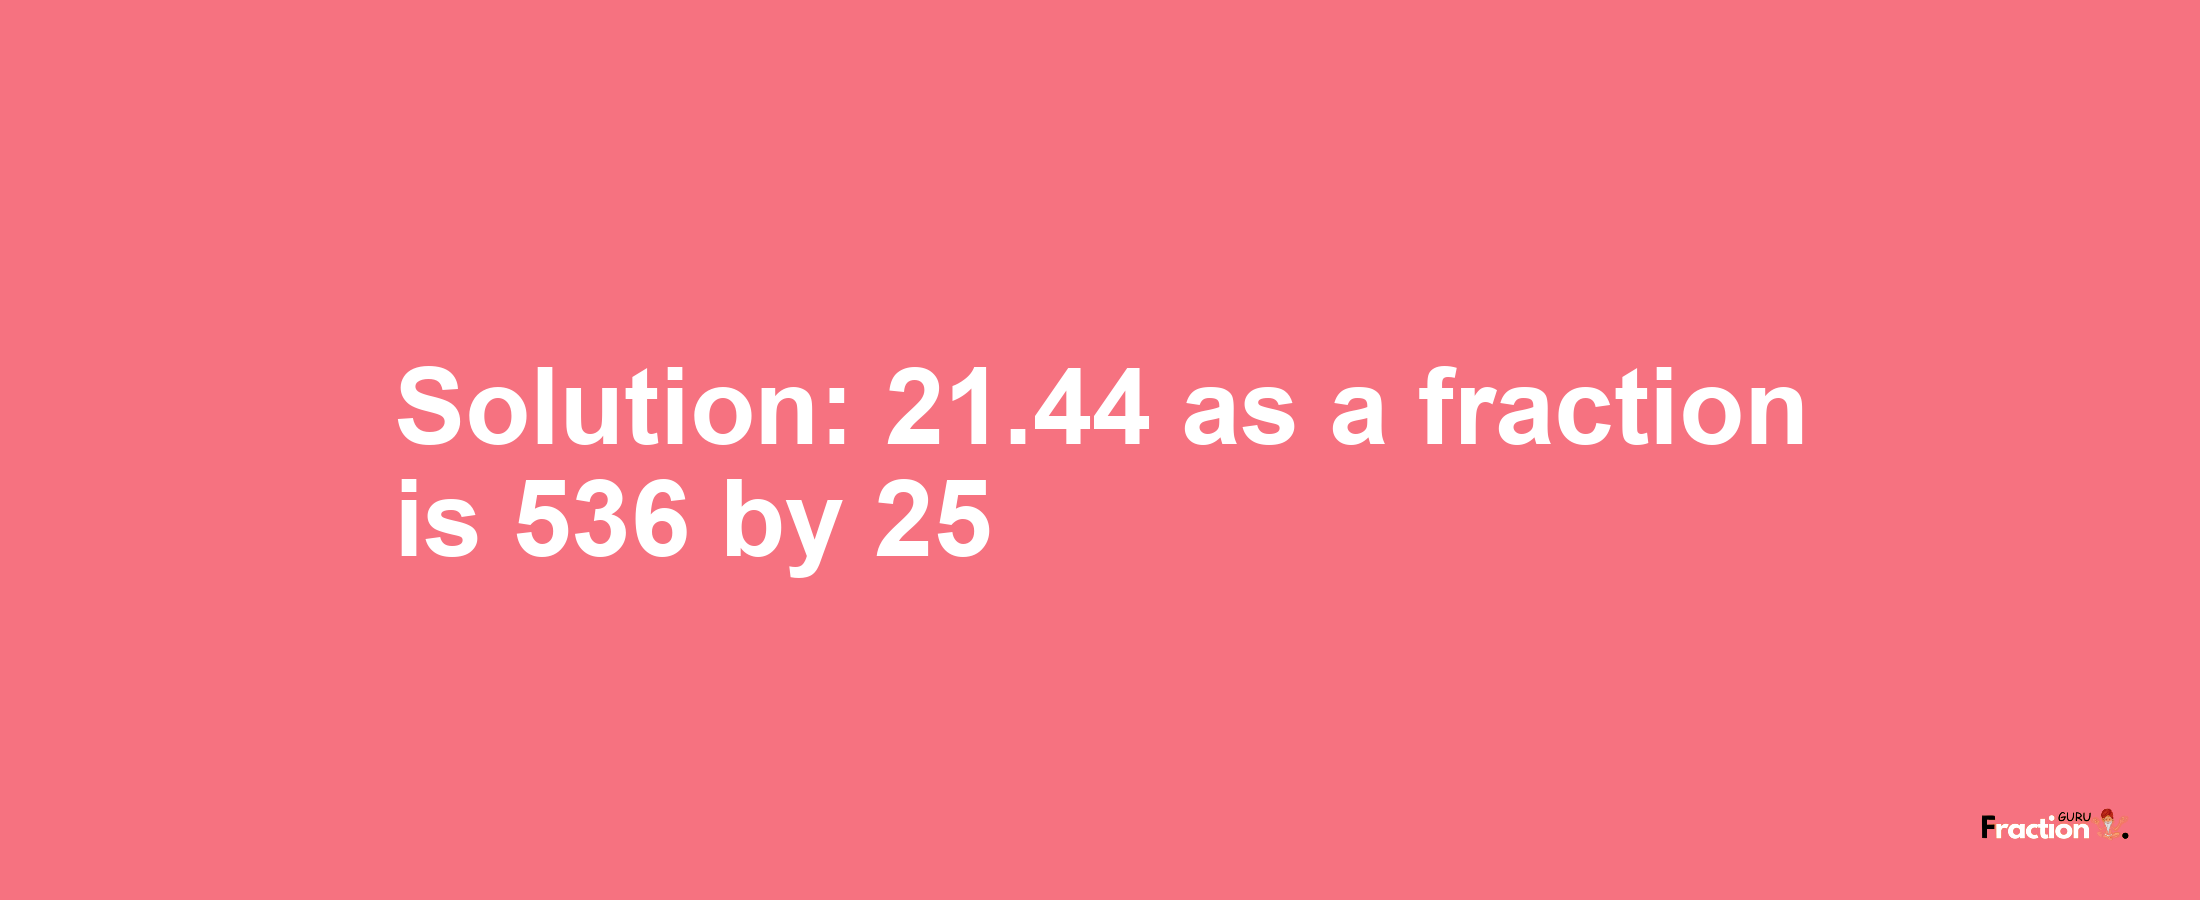 Solution:21.44 as a fraction is 536/25